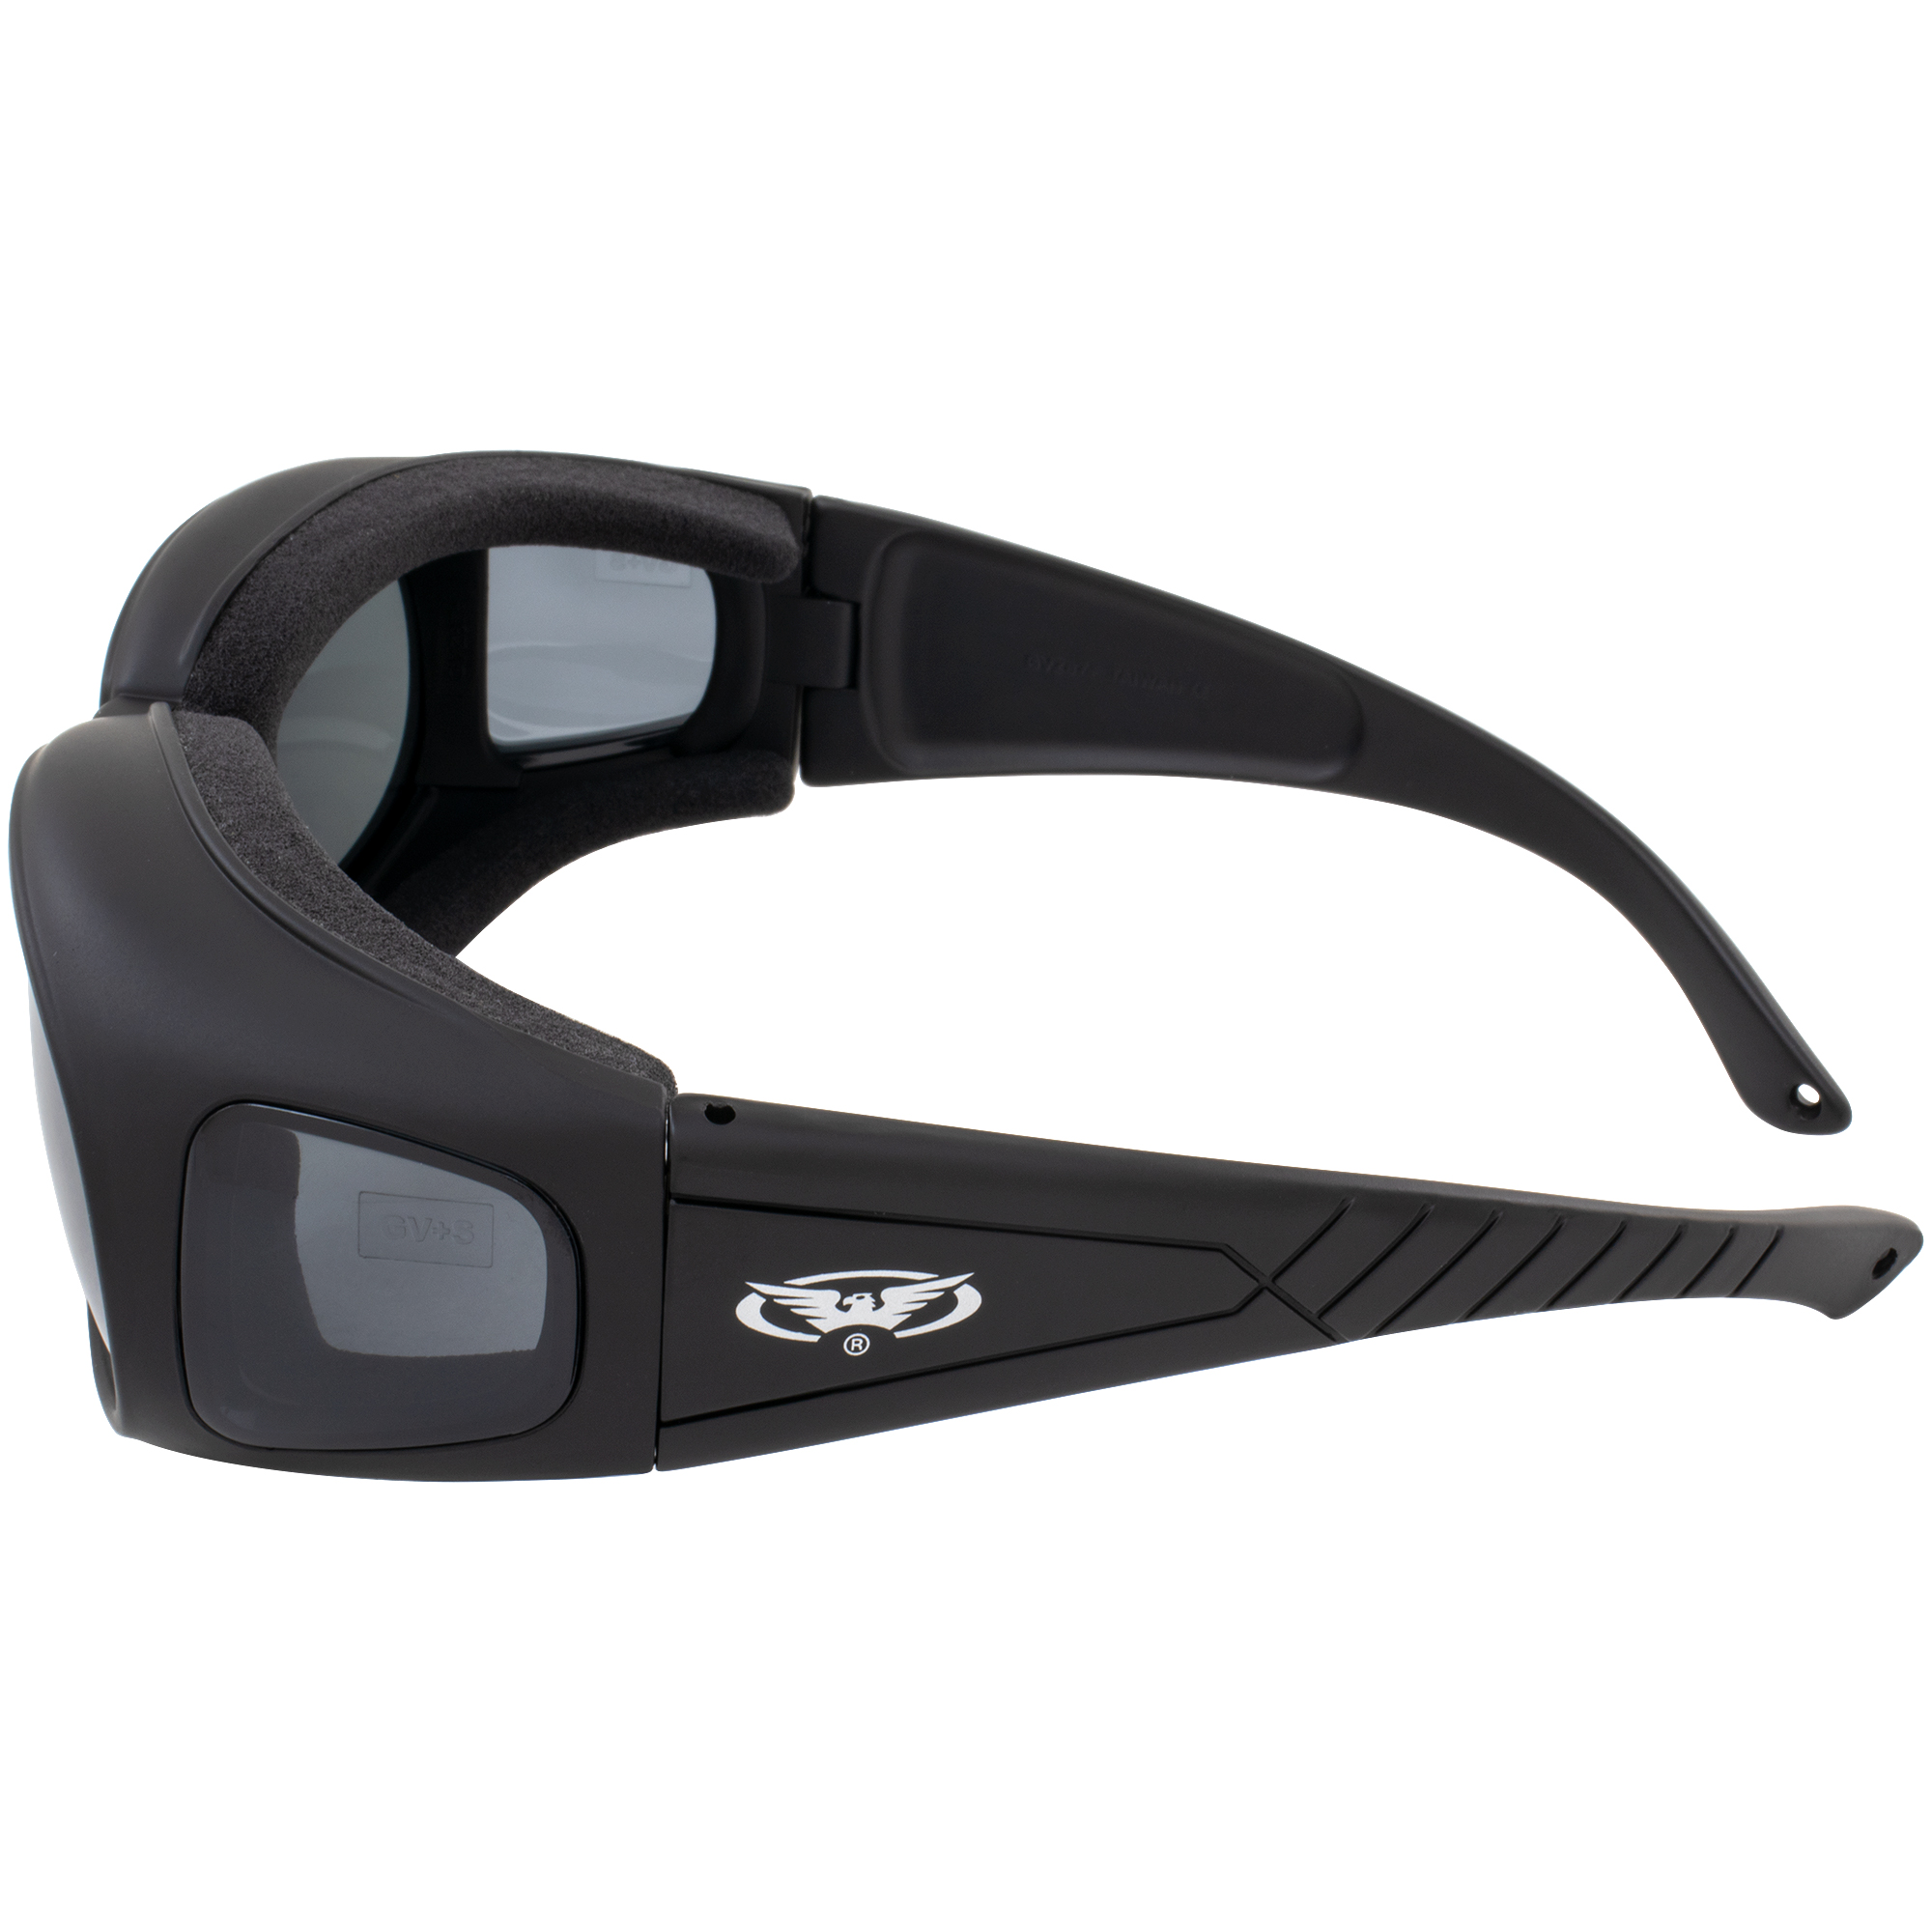 Three (3) Pairs Motorcycle Safety Sunglasses Fits Over Rx Glasses Smoke, Clear, and Yellow Day & Night & Gun Range! Usage Meets ANSI Z87.1 Standards - image 5 of 7